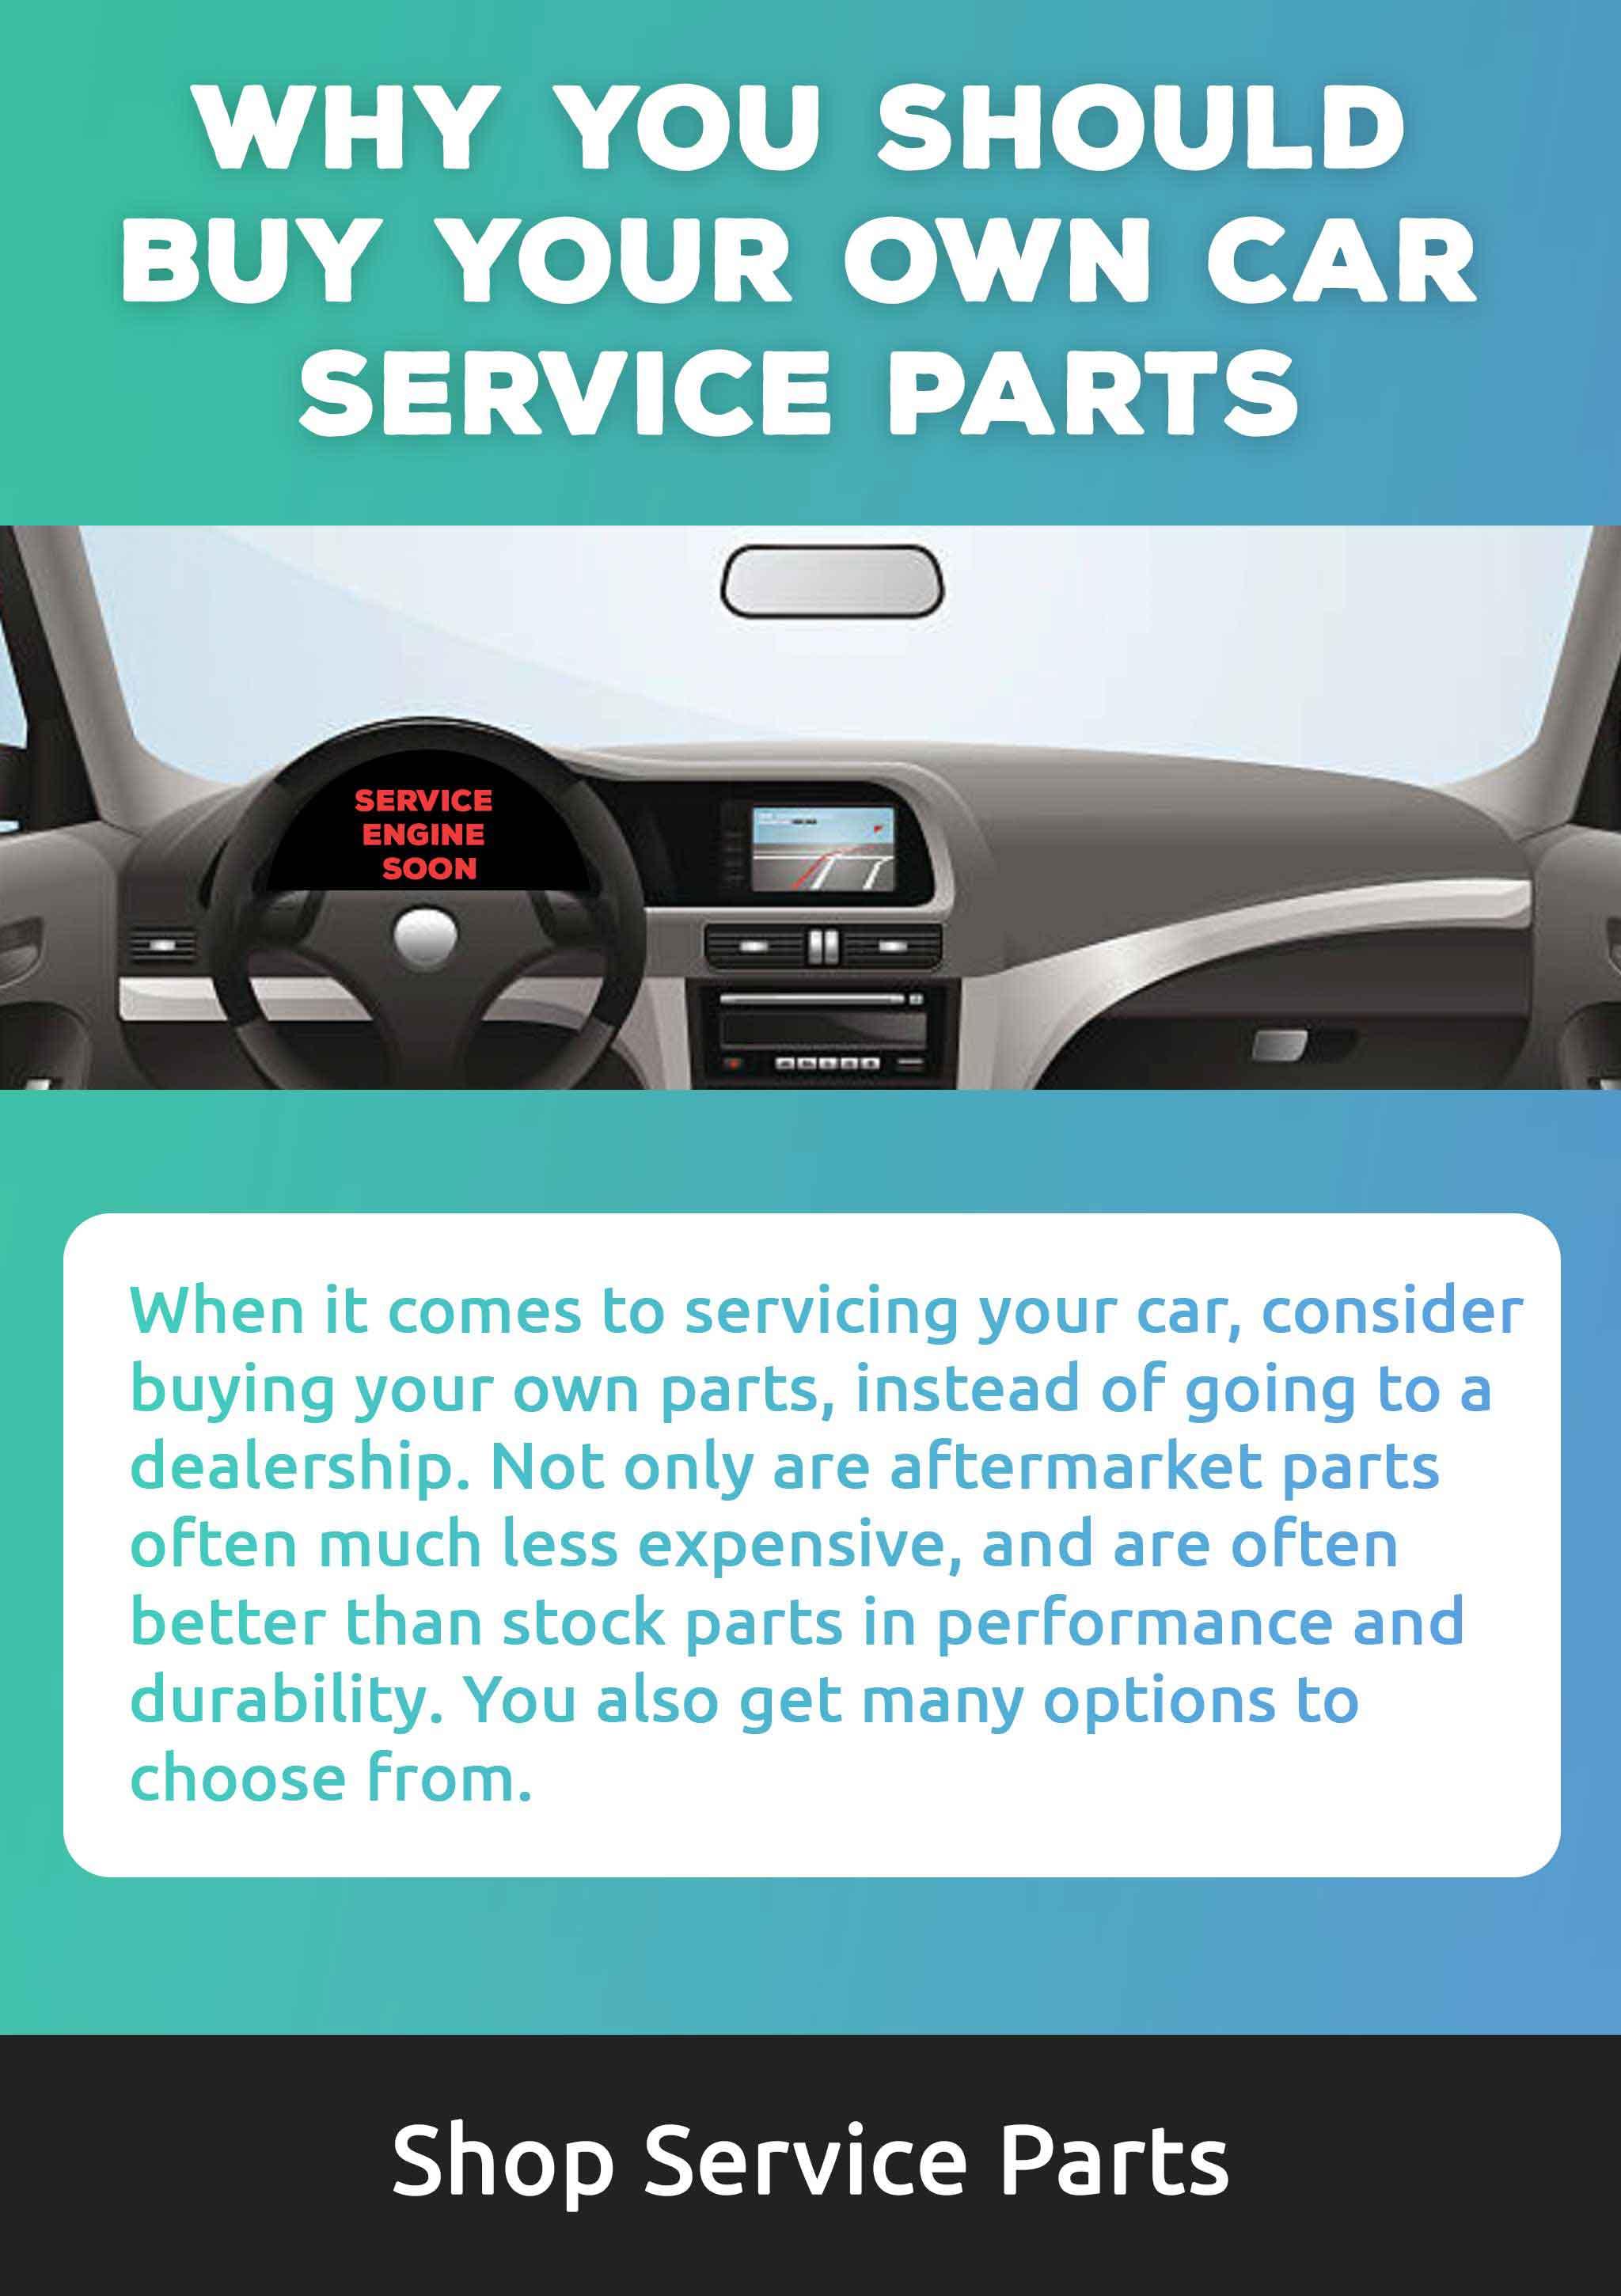 When it comes to servicing your car, consider buying your own parts, instead of going to a dealership. Not only are aftermarket parts  often much less expensive, and are often better than stock parts in performance and durability. You also get many options to  choose from.